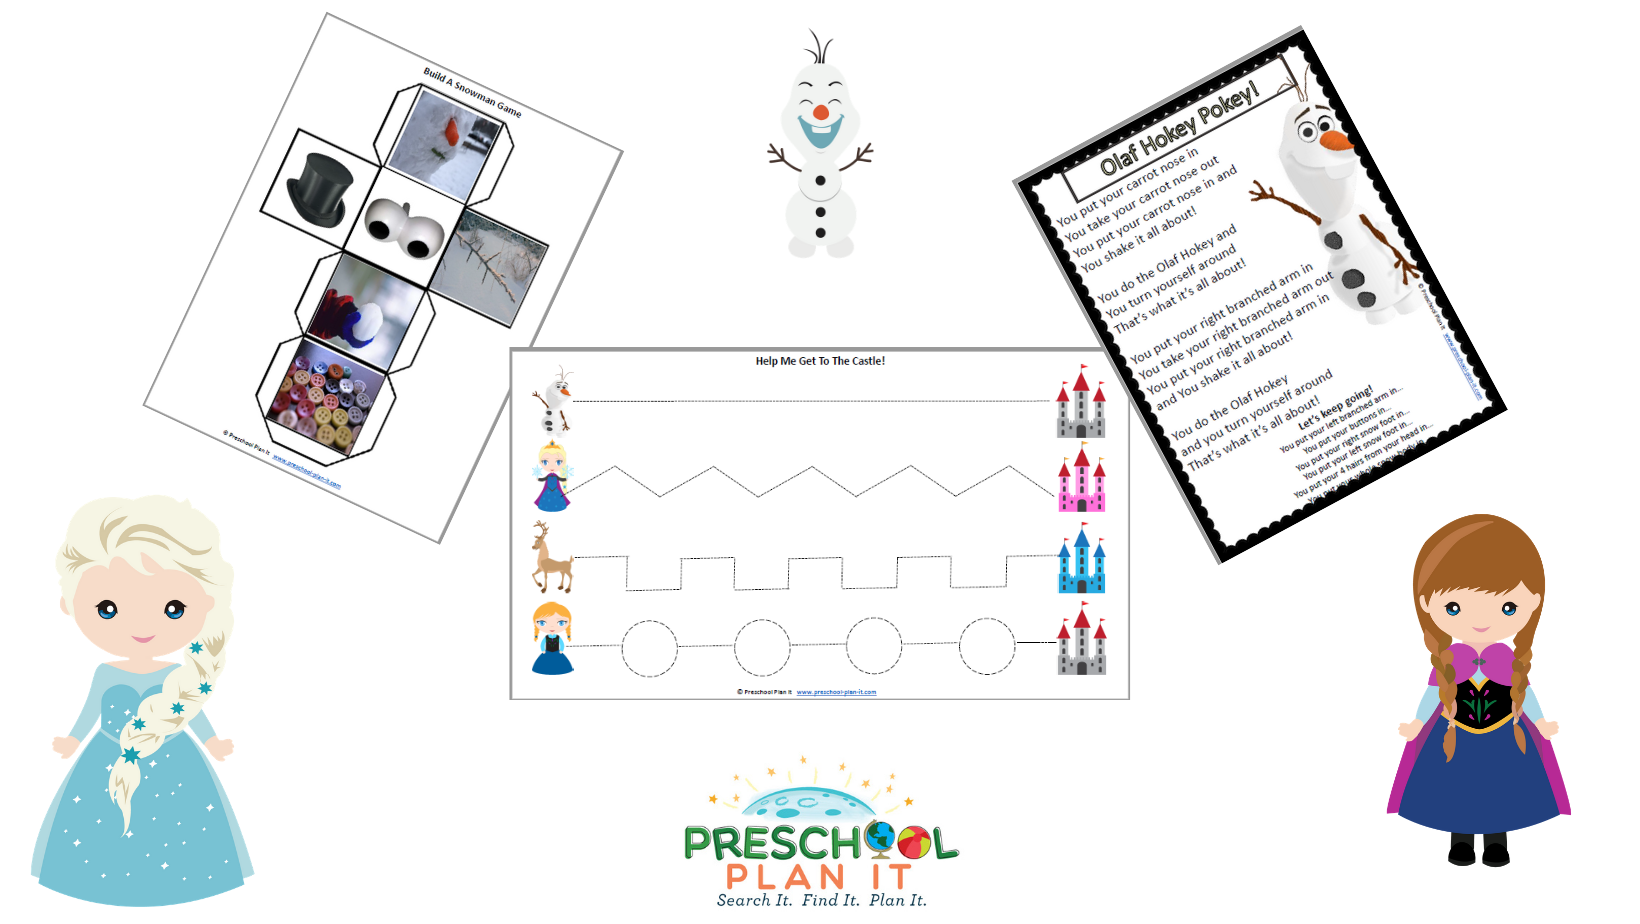 A 60 page Frozen-Inspired Preschool Theme resource packet to help save you planning time!